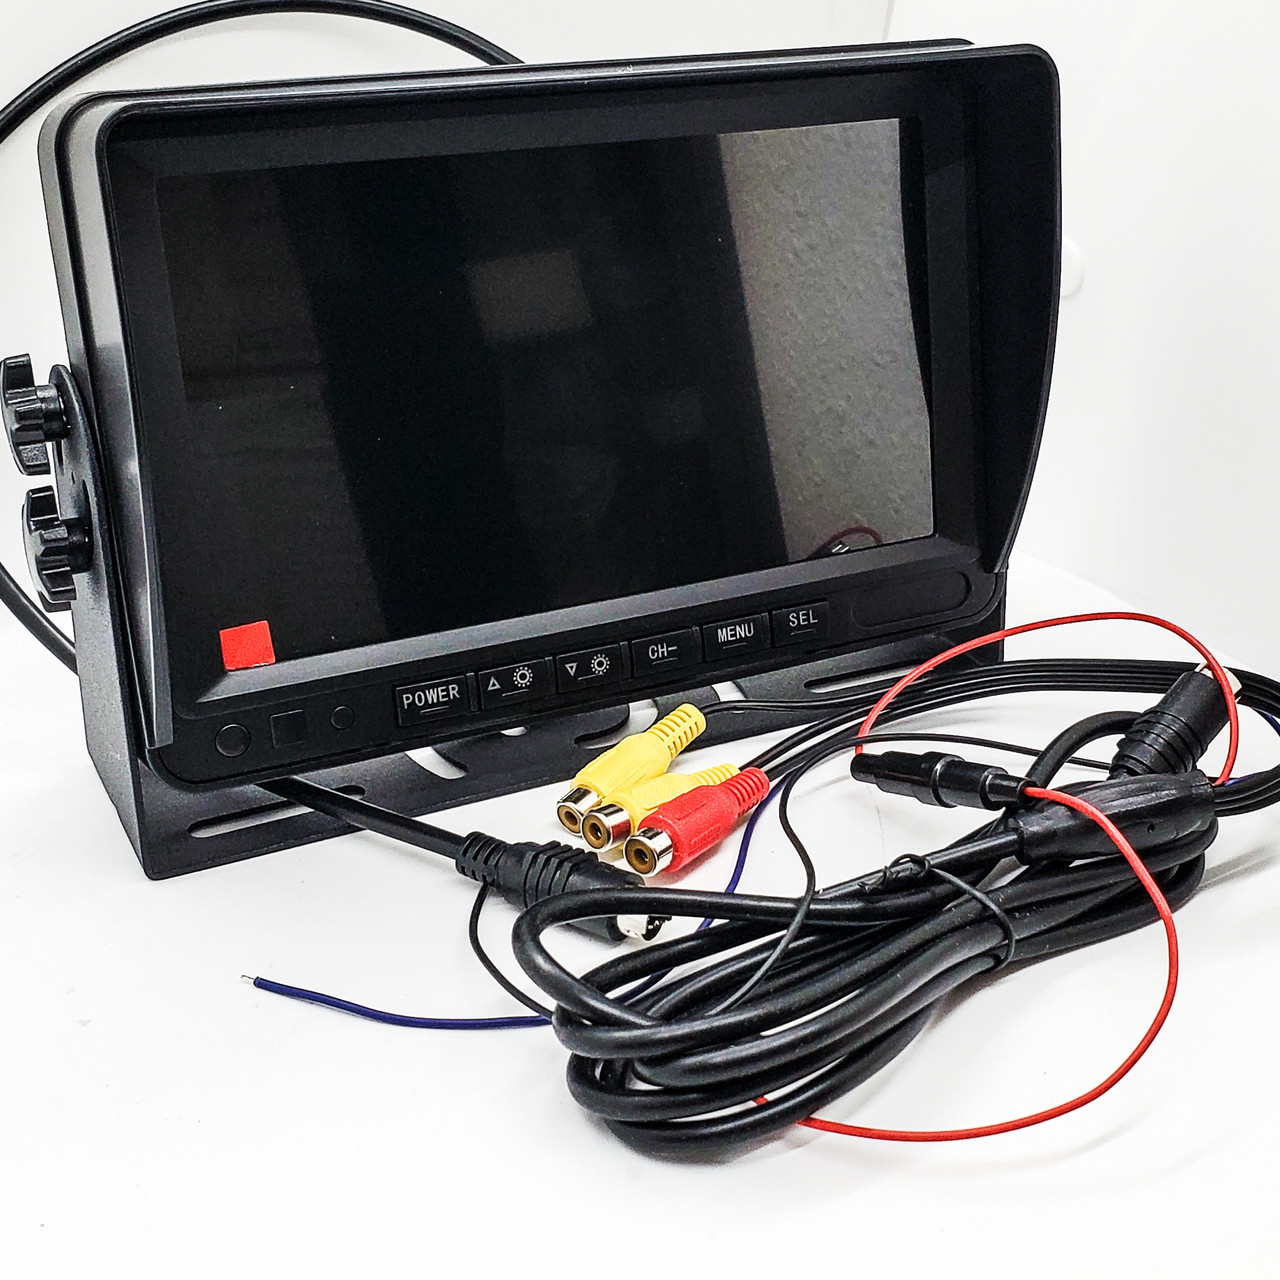 Equipar Para editar Oral 7" High Resolution TFT LCD Color Monitor 4 Video Input with Remote